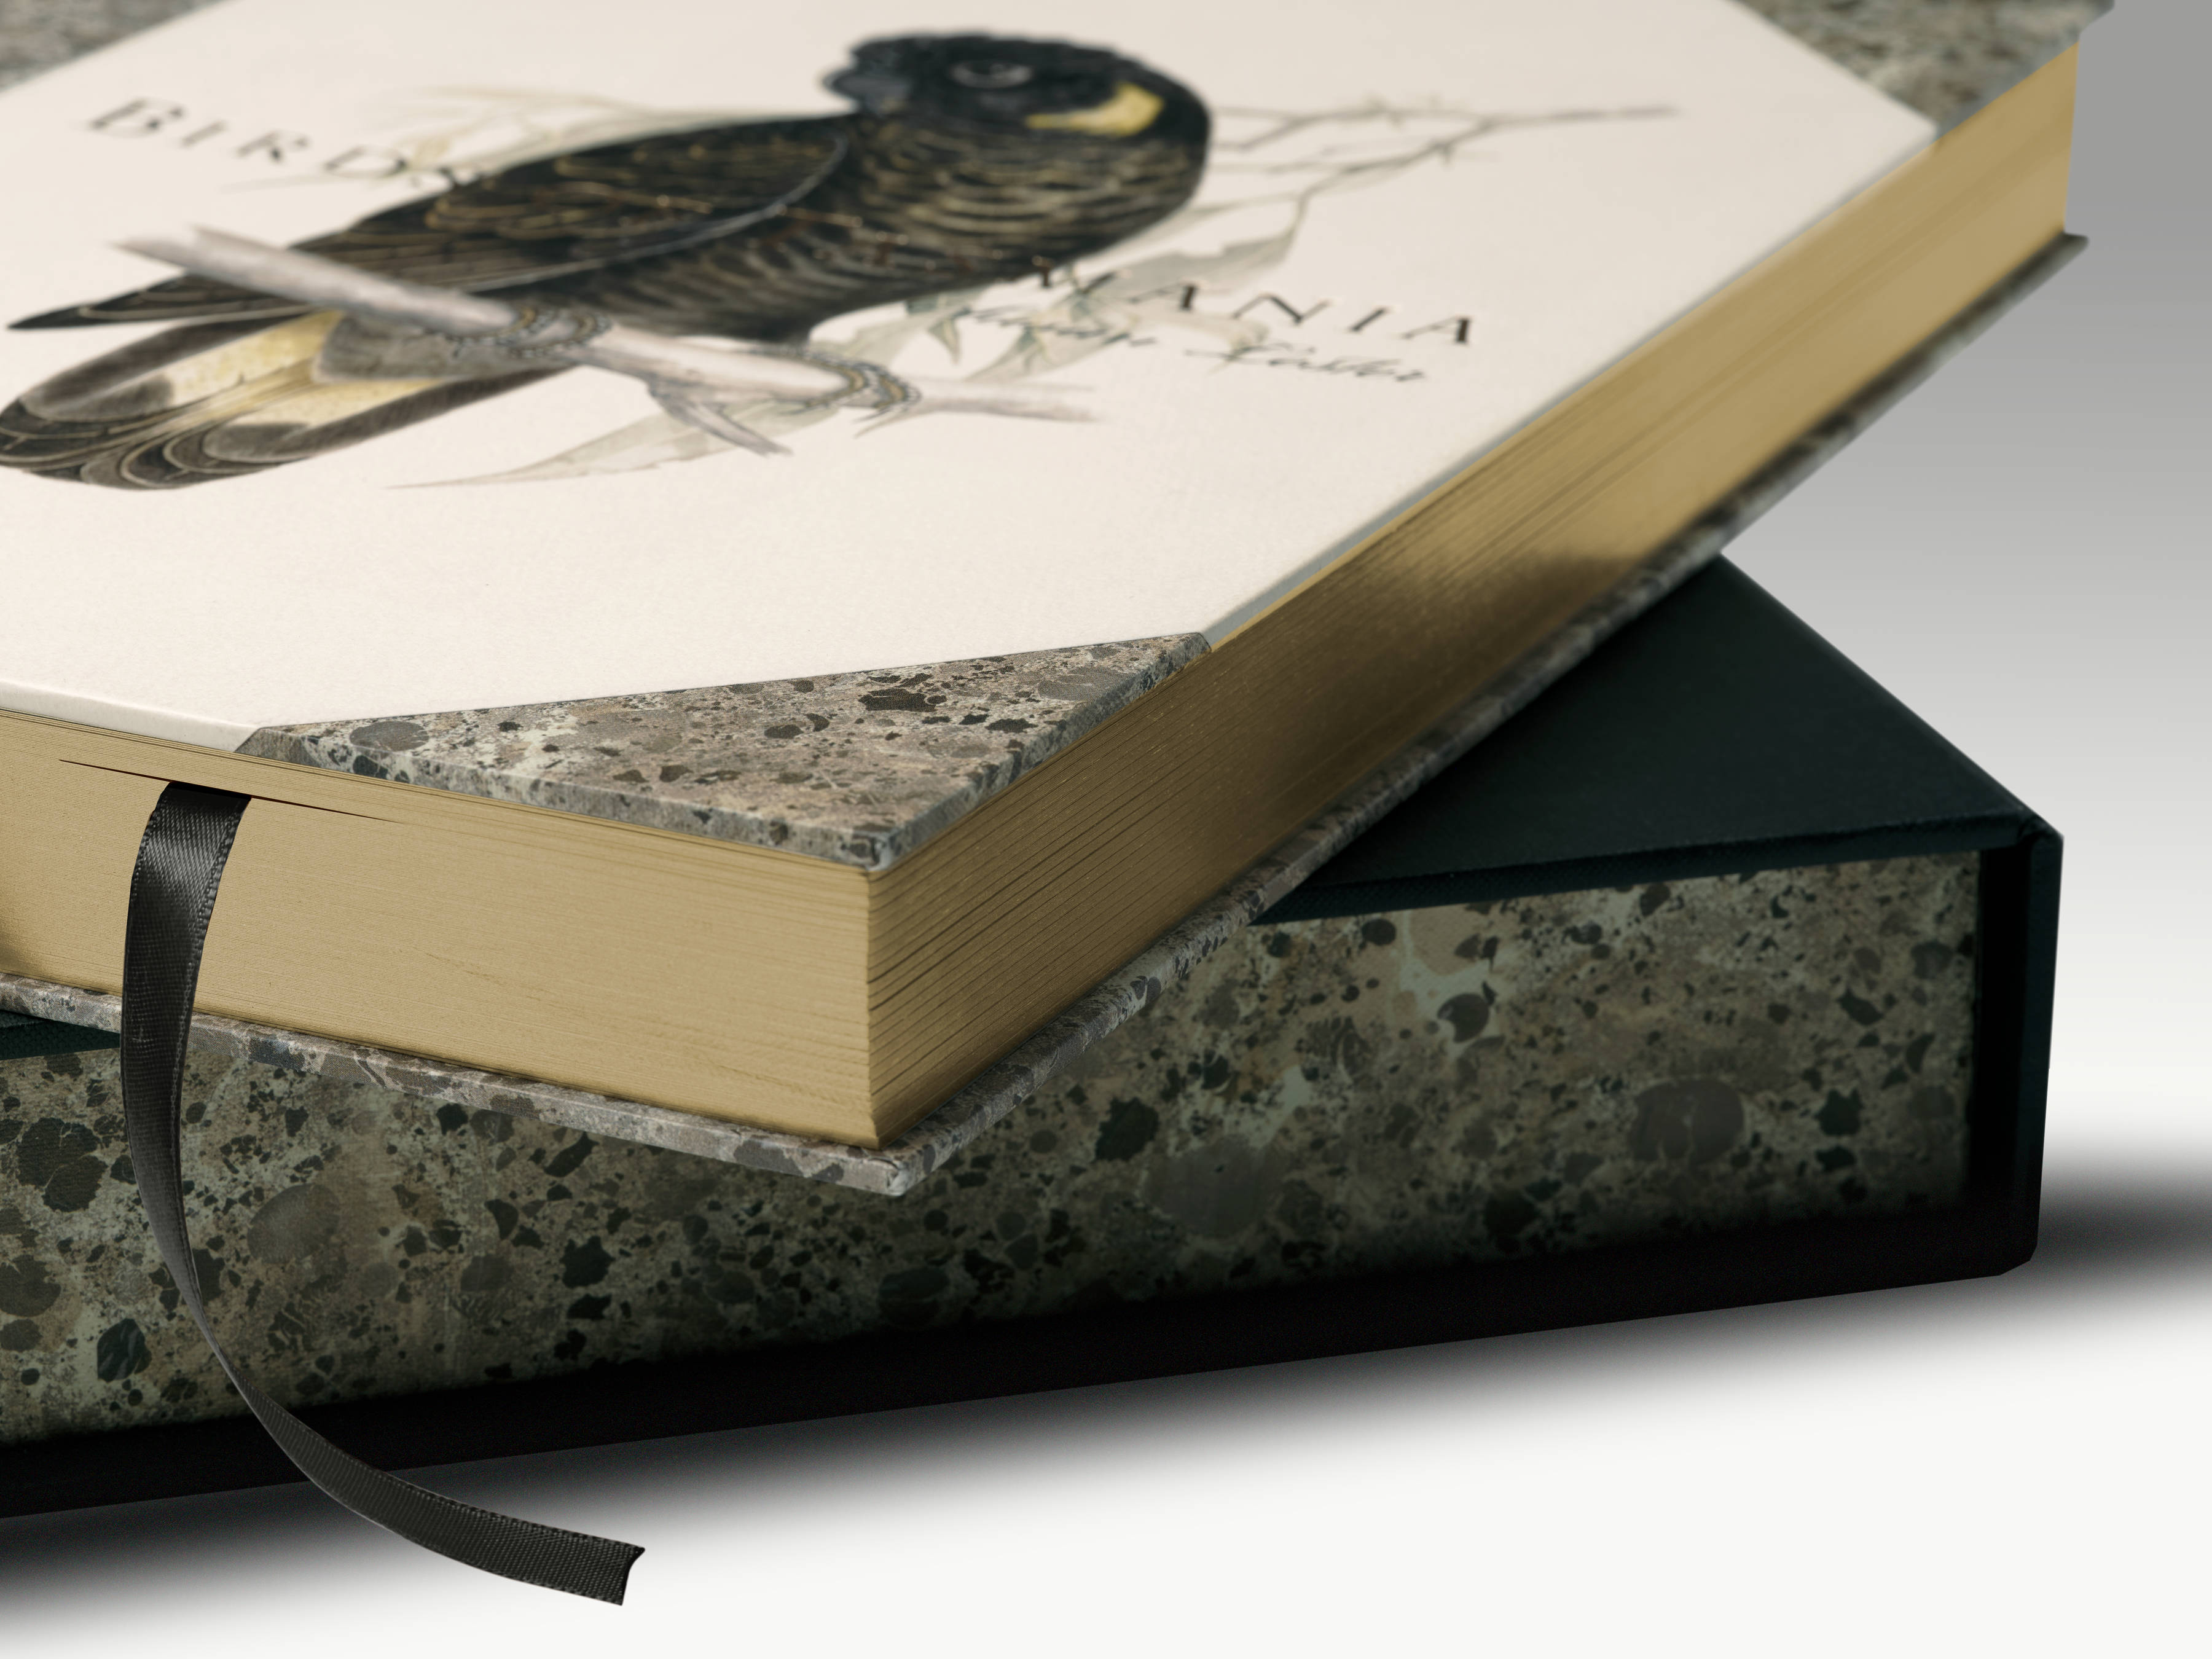 A close-up of the ‘Birds of Tasmania’ by Susan Lester book showing gold foil gilding of the book’s exposed edges.